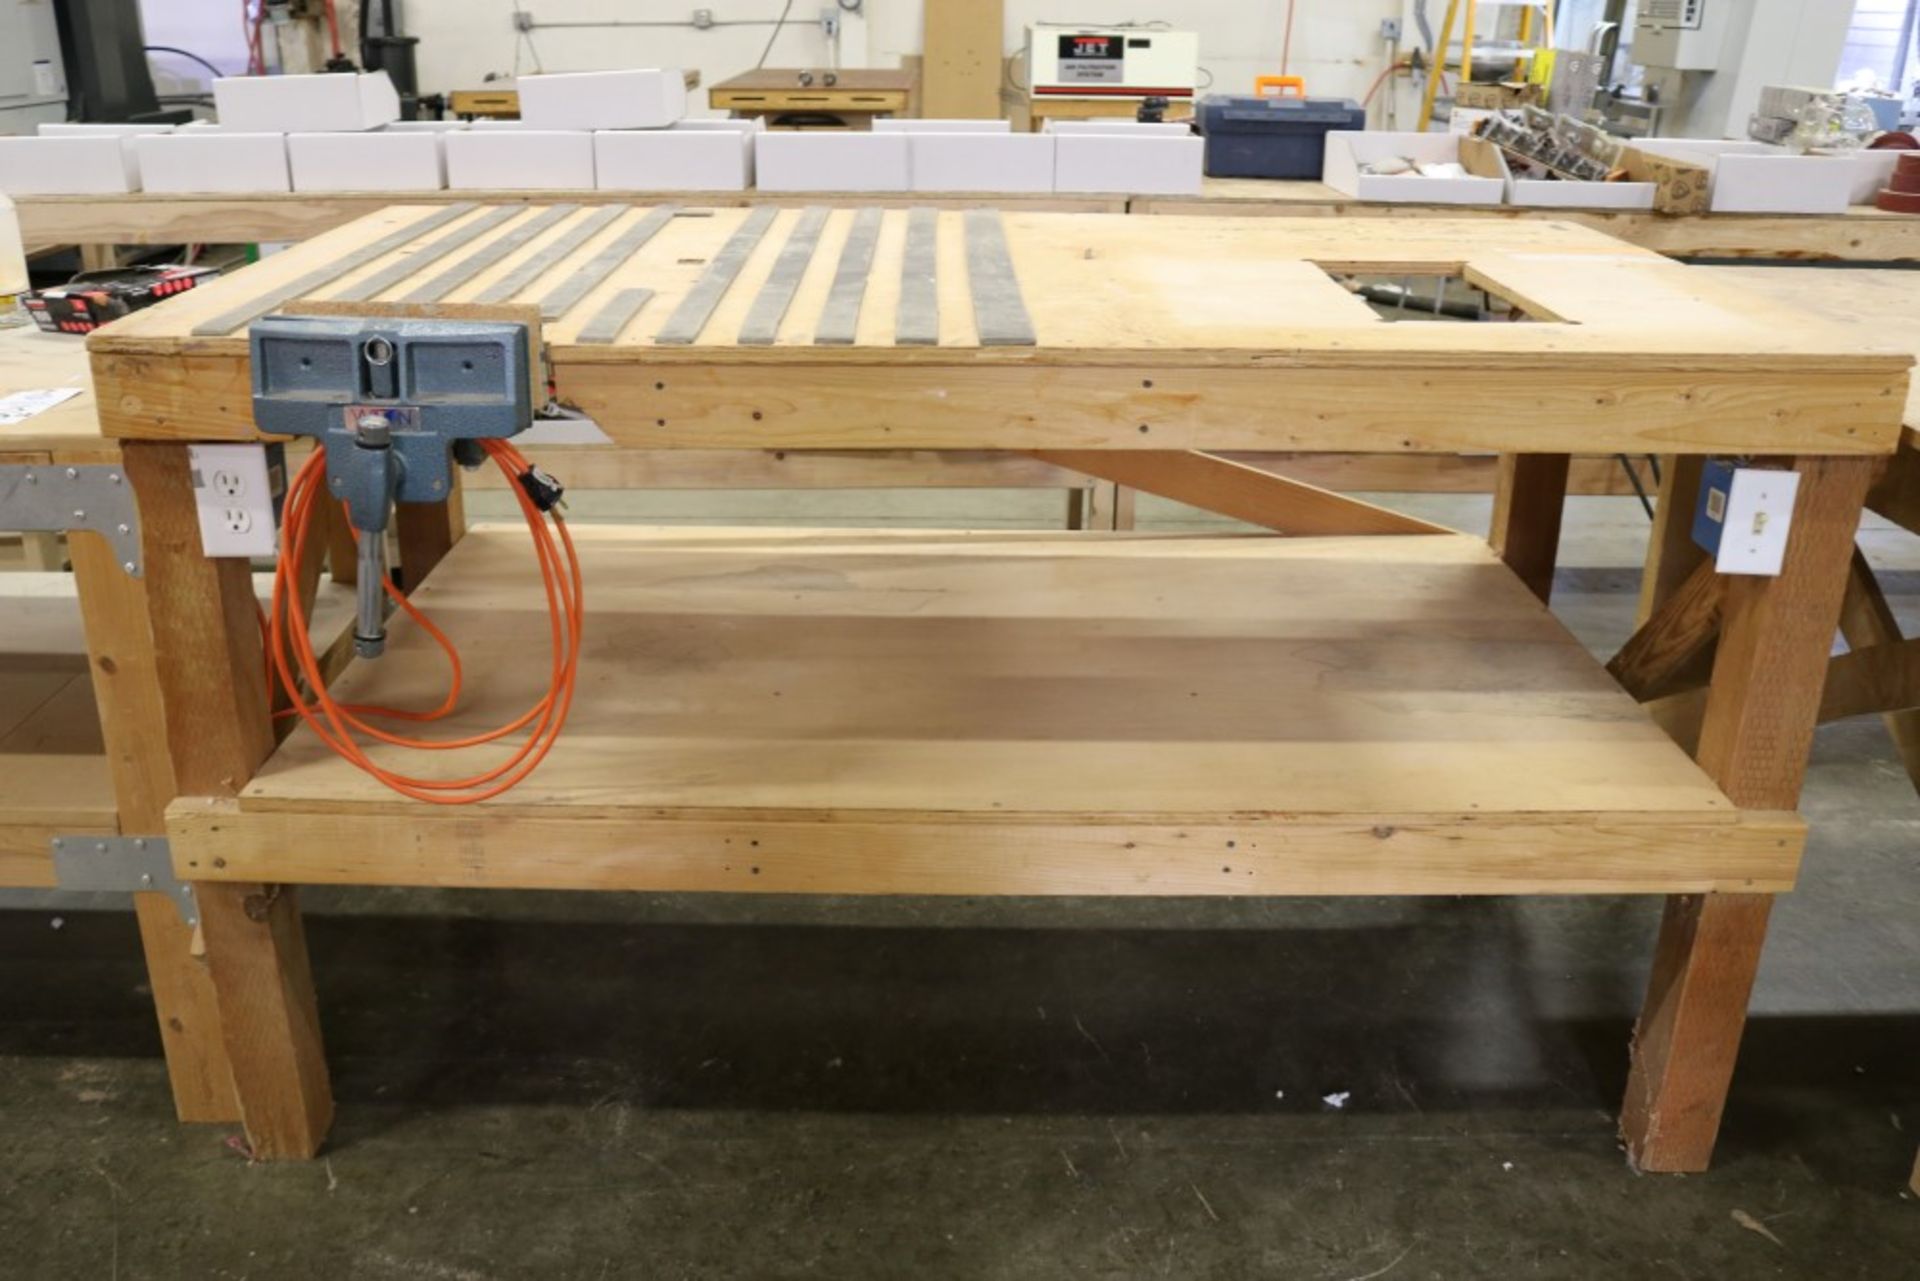 2 Tier Heavy Duty Wood Work Station with Electrical Outlets and Wilton 10" Vise 72" x 39" x 41"